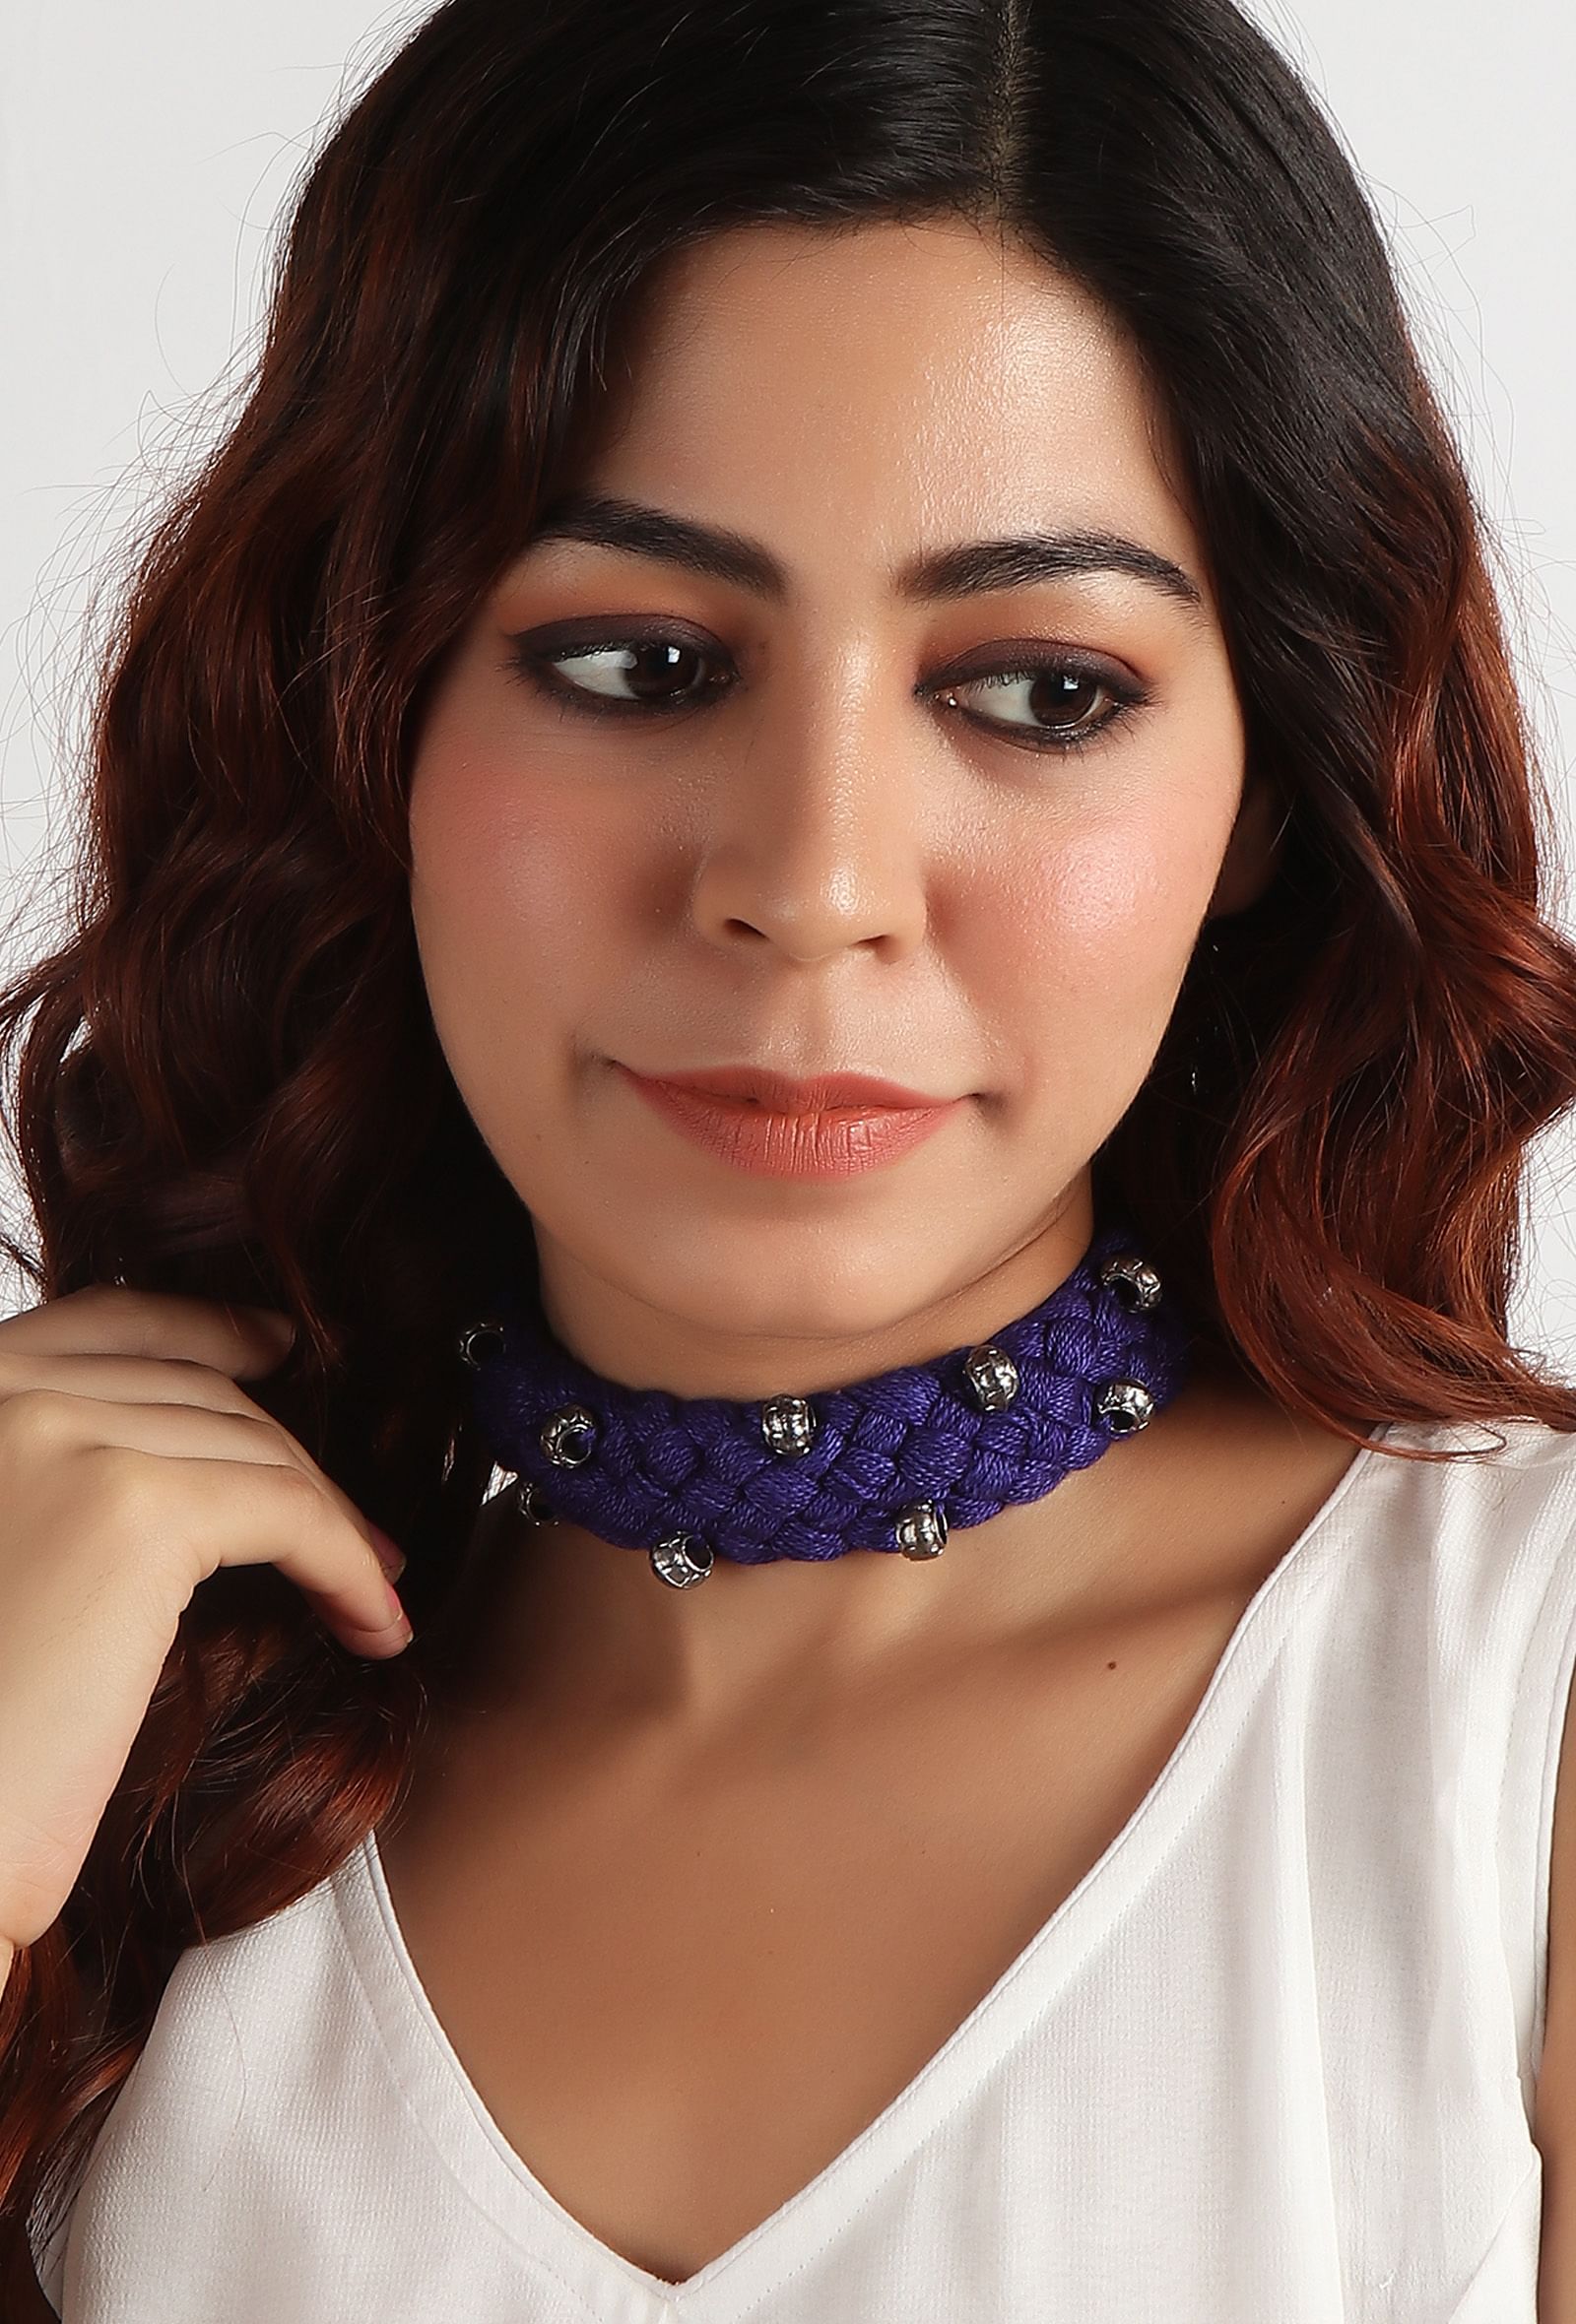 Violet Thread & German Silver Tribal Choker With Beads